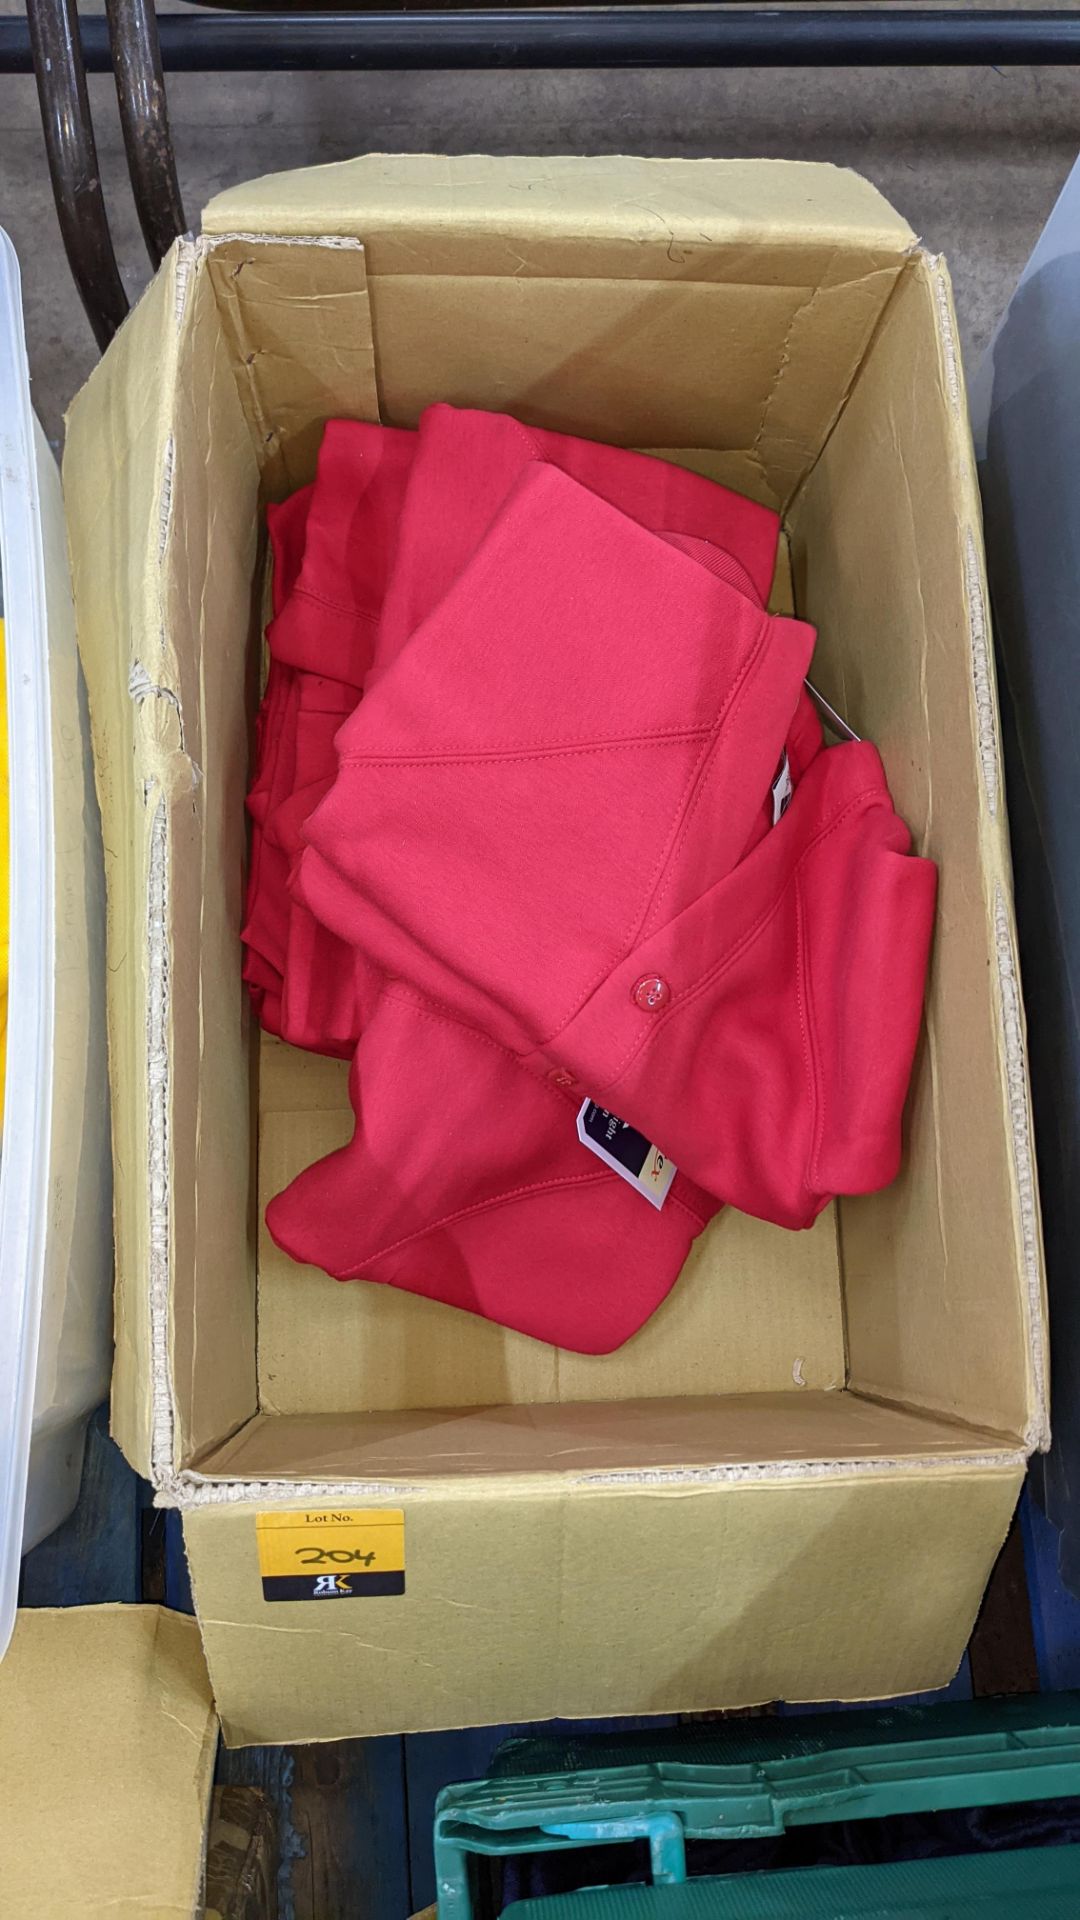 Approx 7 off Sportex children's heavy weight V neck red cardigans - Image 2 of 4